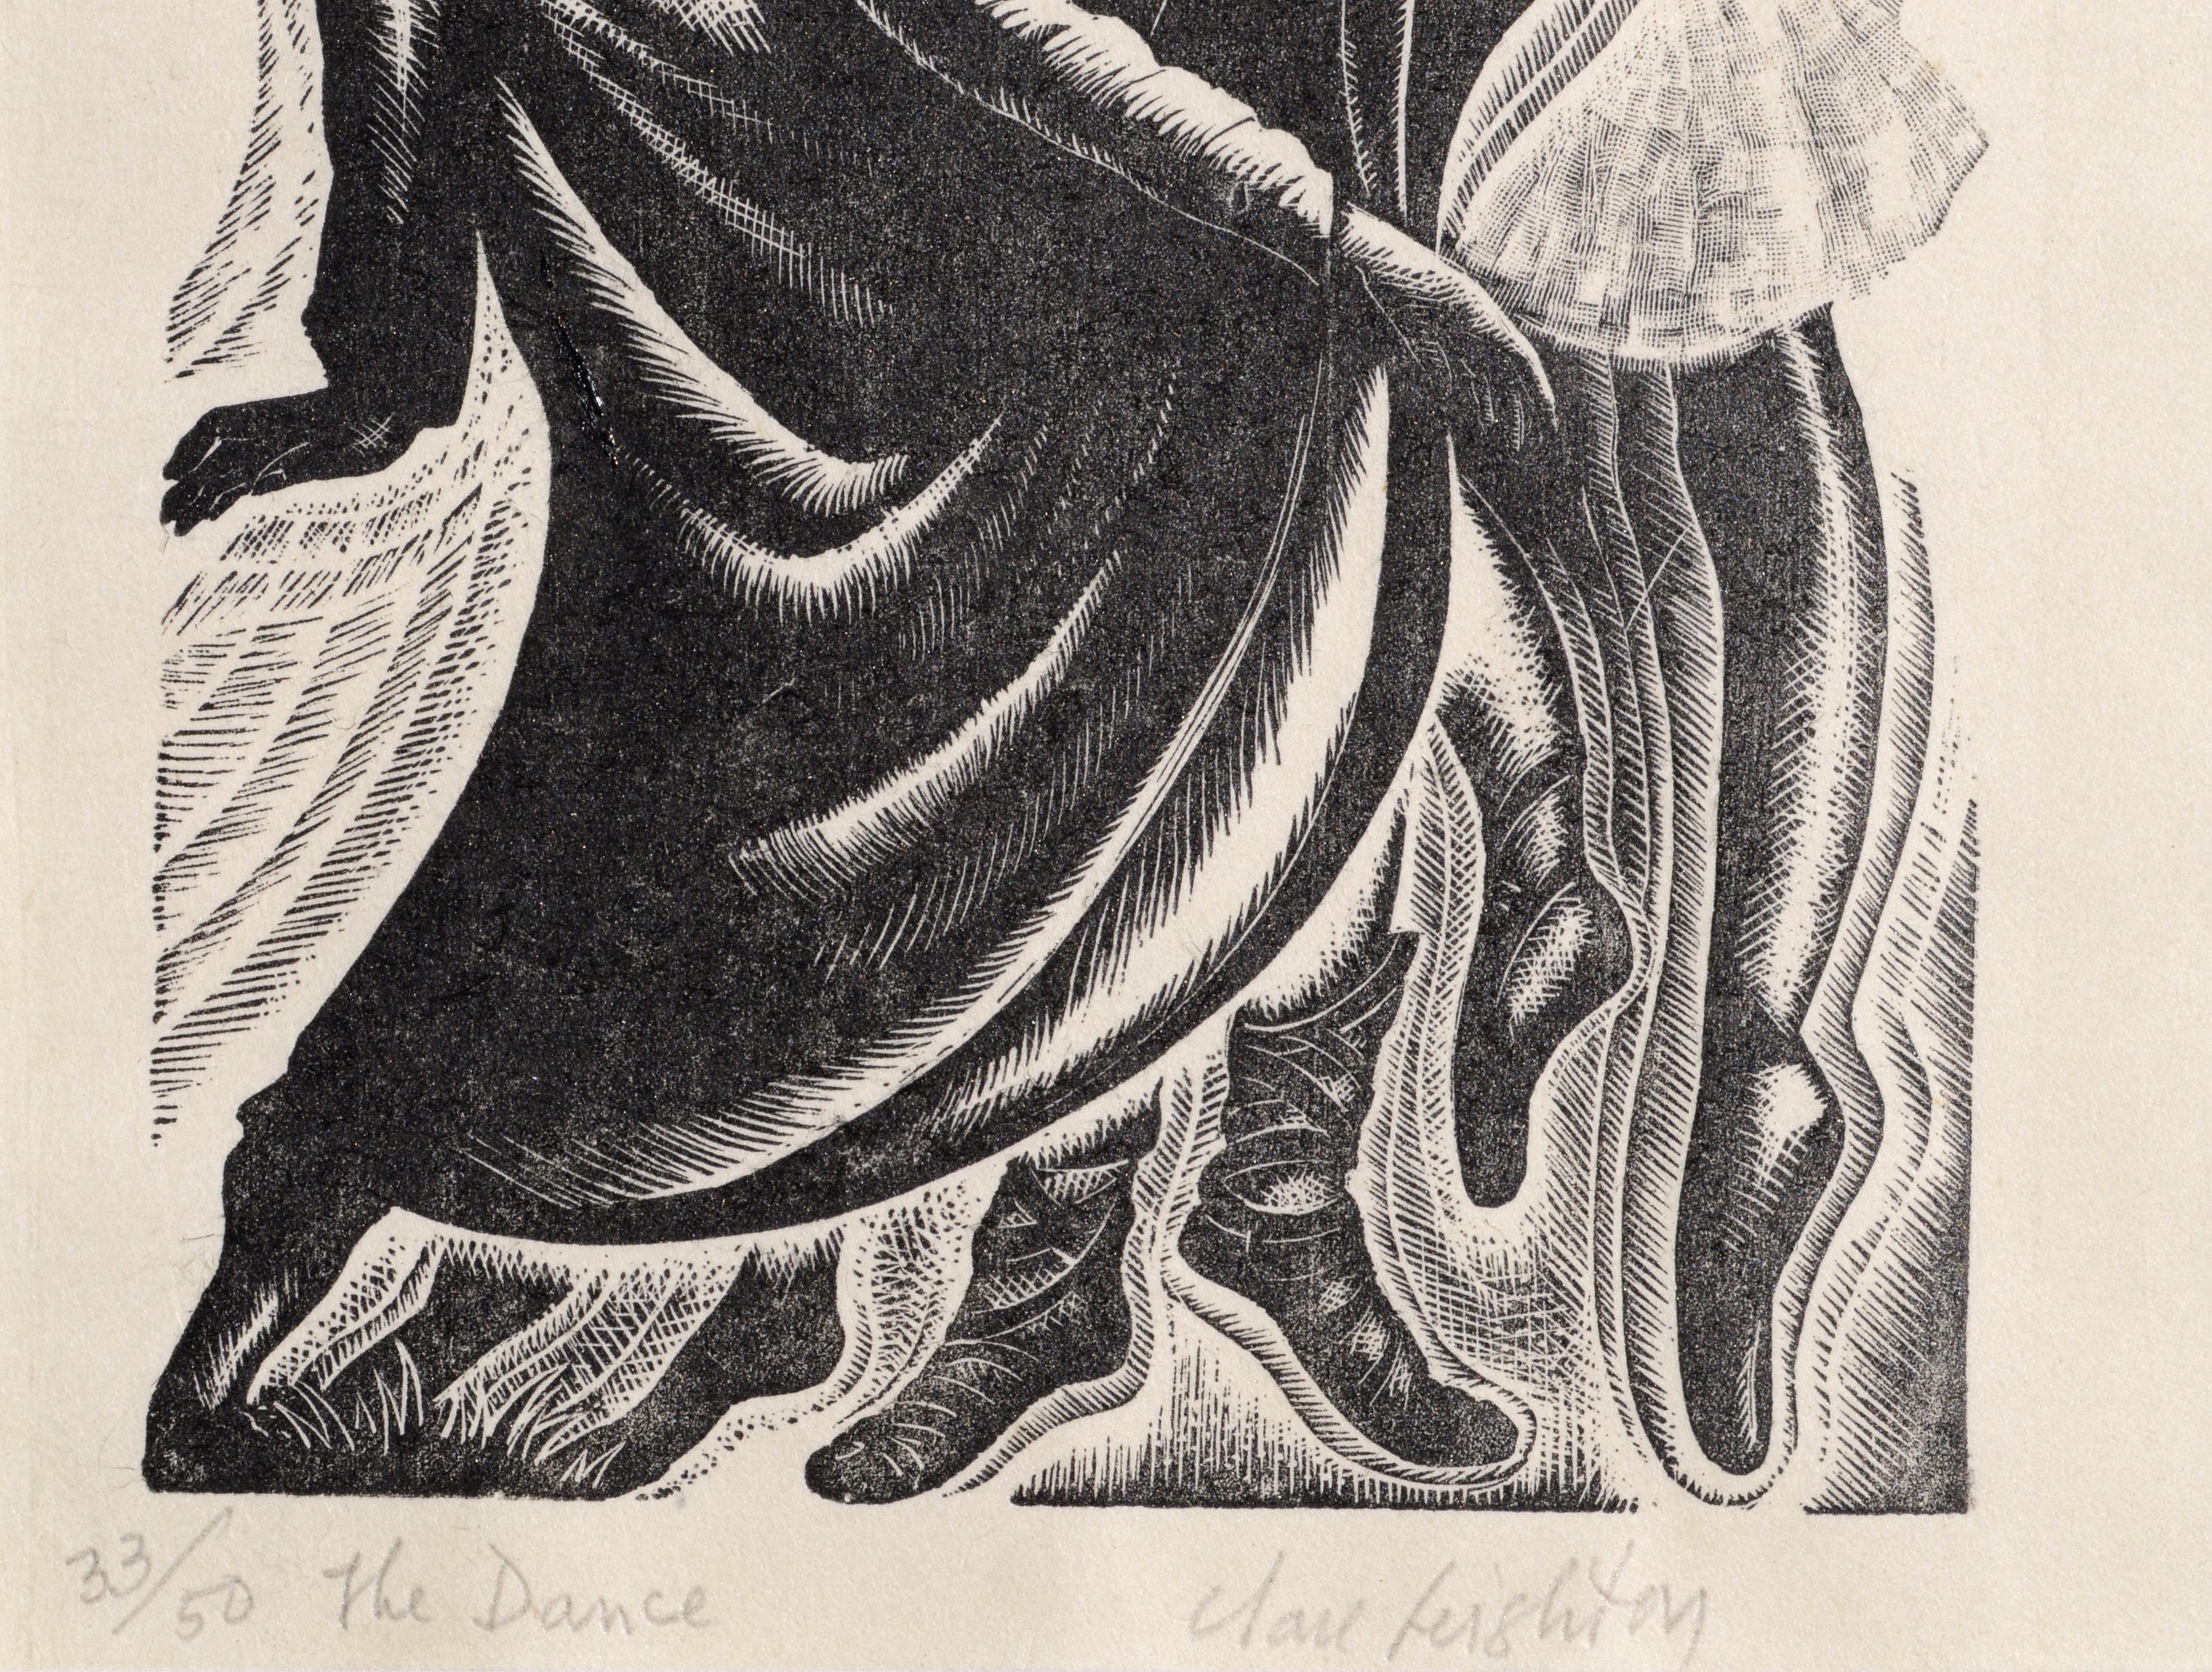 Dynamic mid-century figurative lithograph of a dancer by Clare Leighton (English, 1898-1989). Numbered (